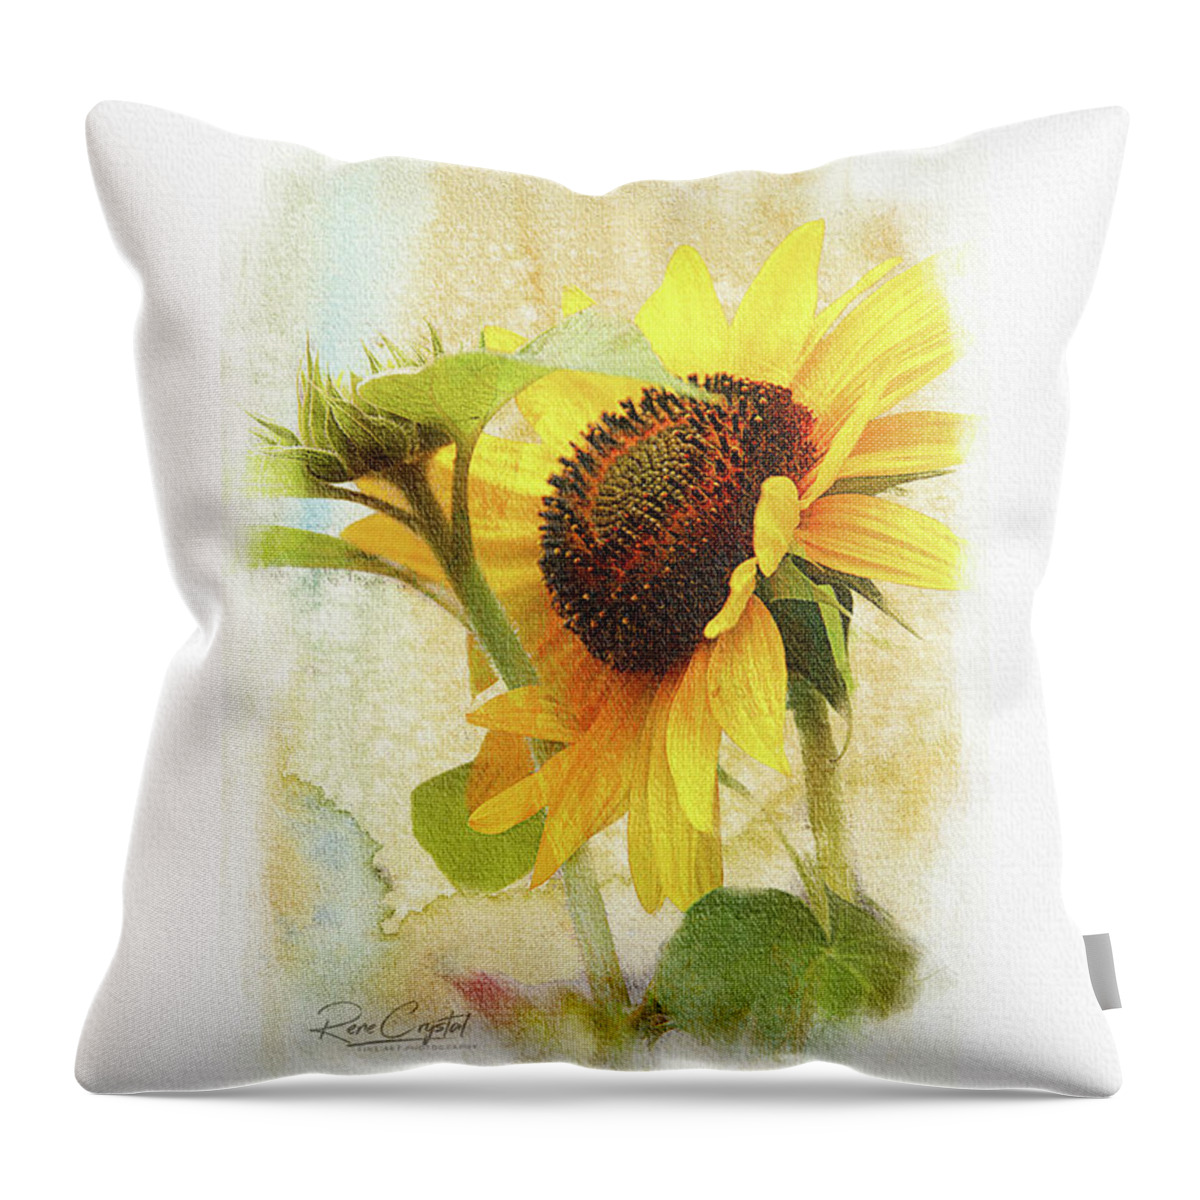 Sunflowers Throw Pillow featuring the photograph Summer's Big Yellow by Rene Crystal